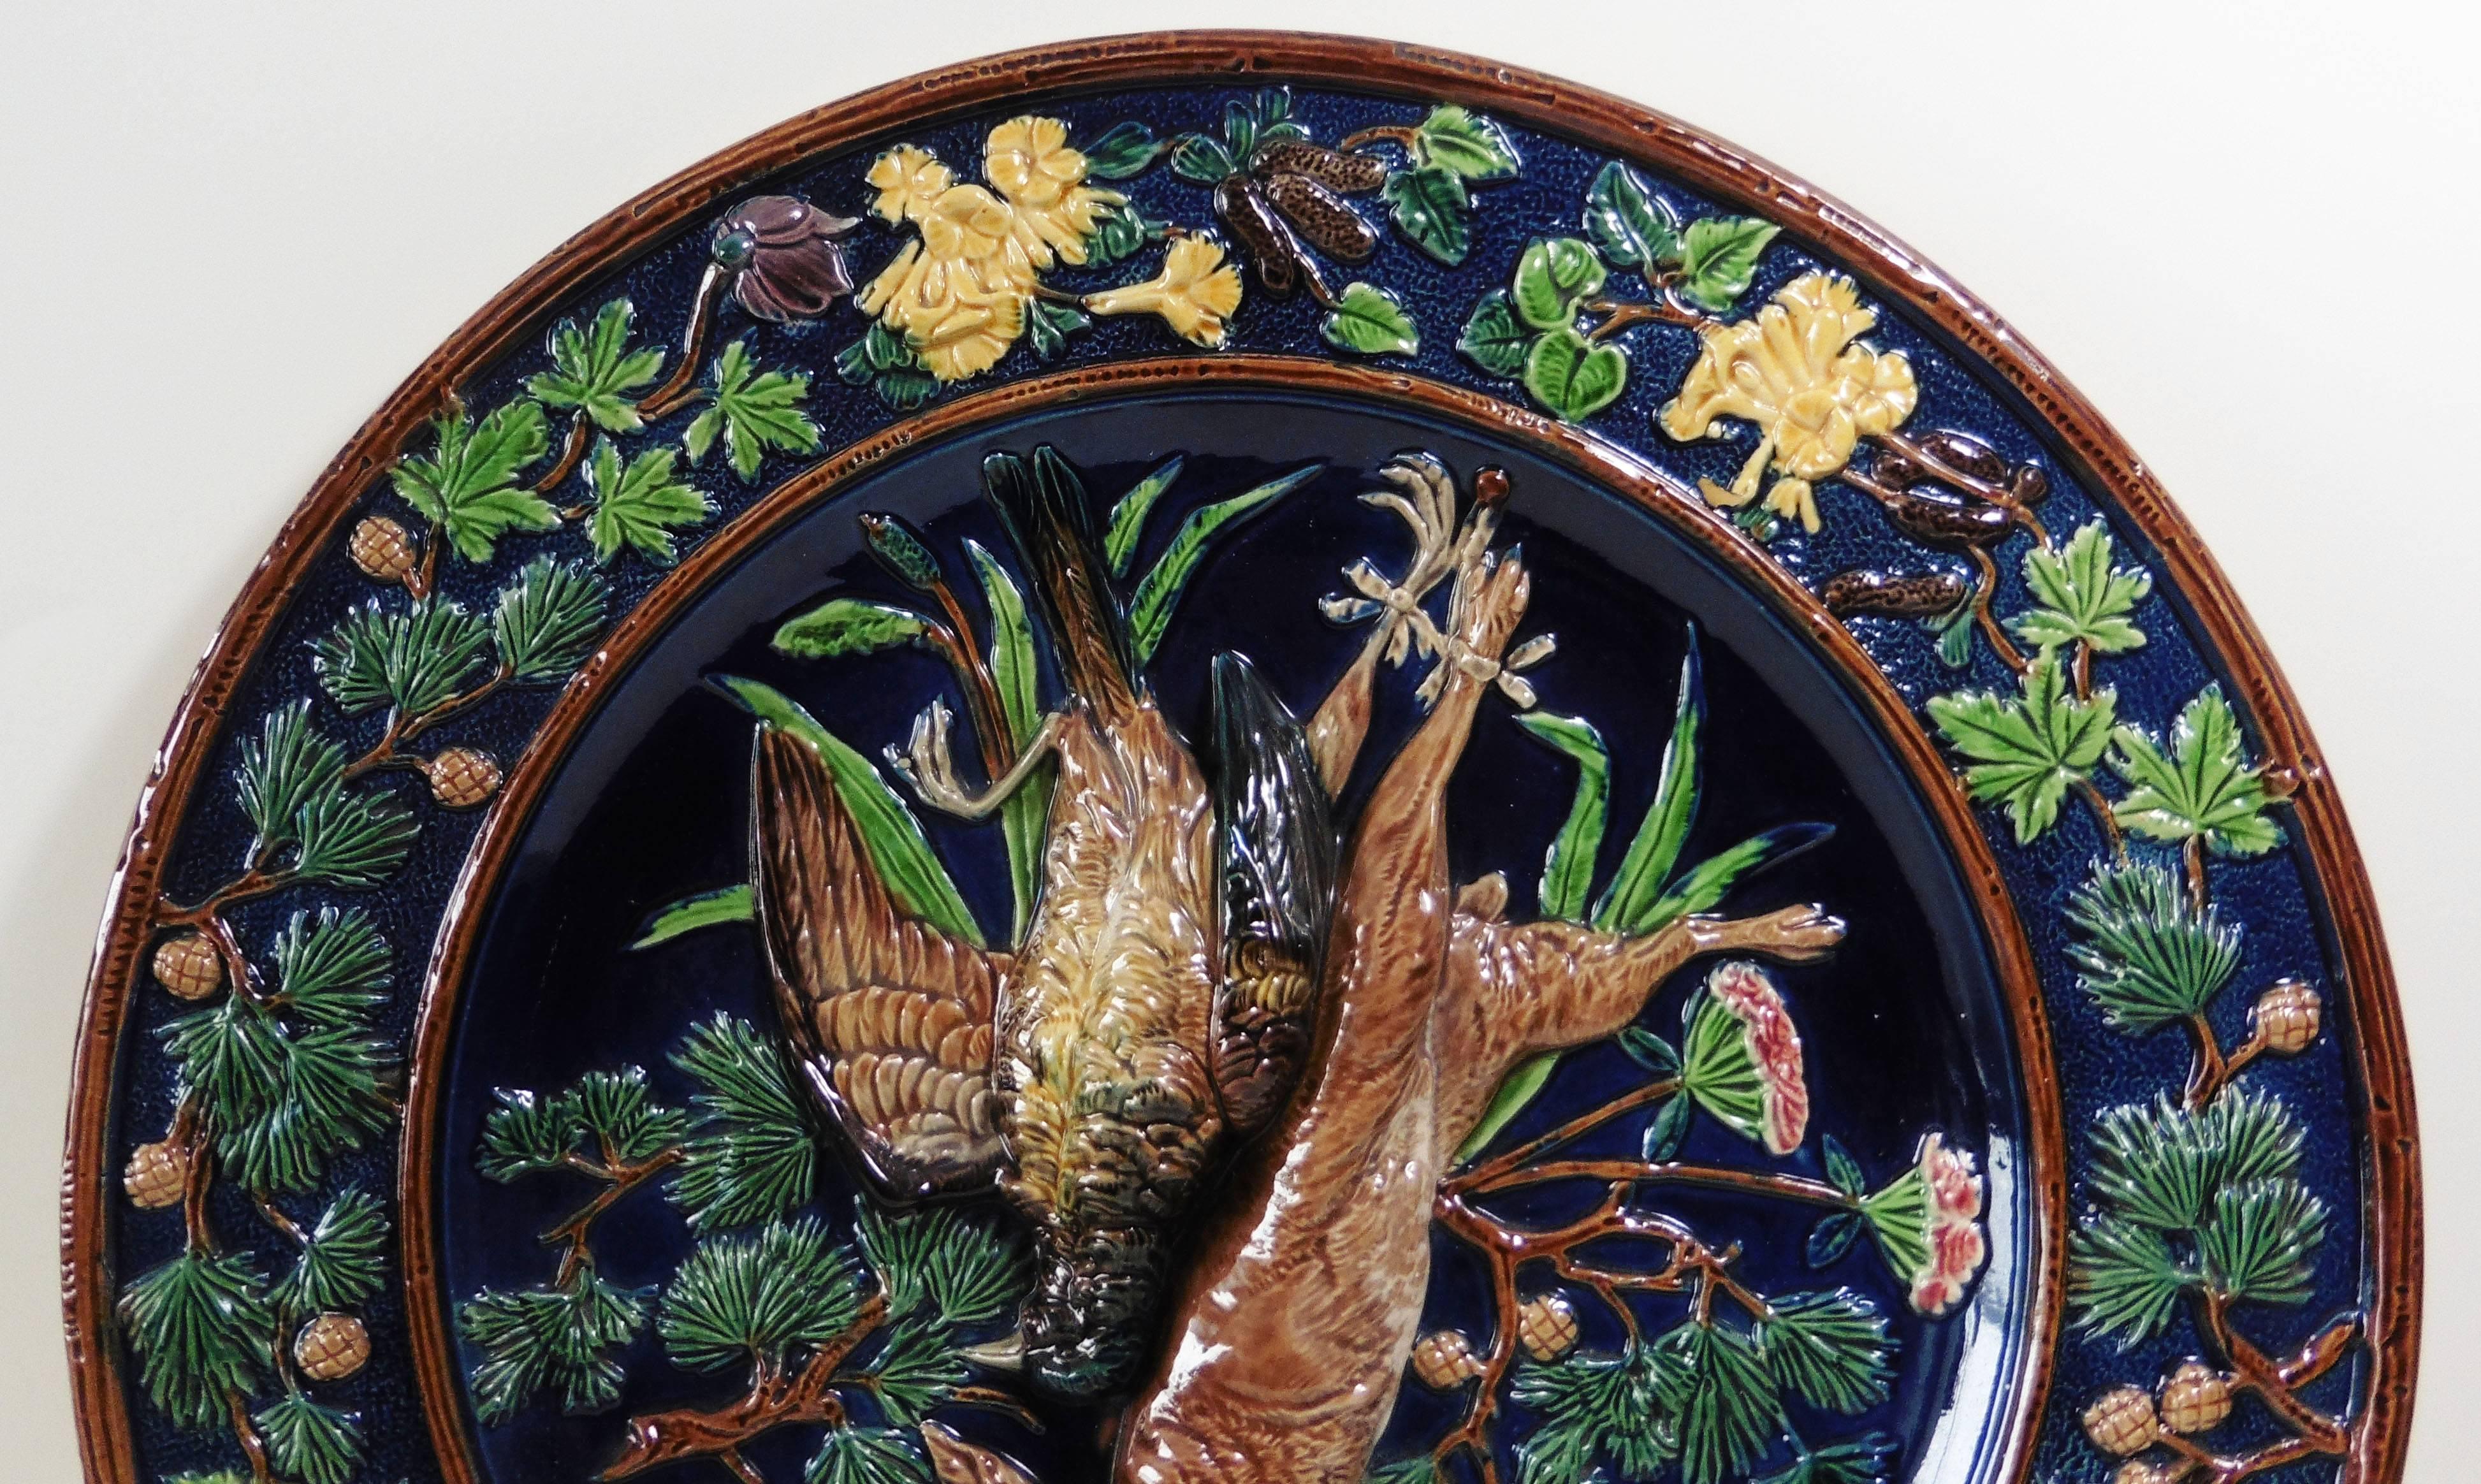 Large 19th Majolica trophies wall platter or charger signed Johann Maresch.
On a dark blue cobalt background, a large trophy with bird and hare with needles and cones pine, the border is decorated with yellow, purple and pink flowers.
Measures: